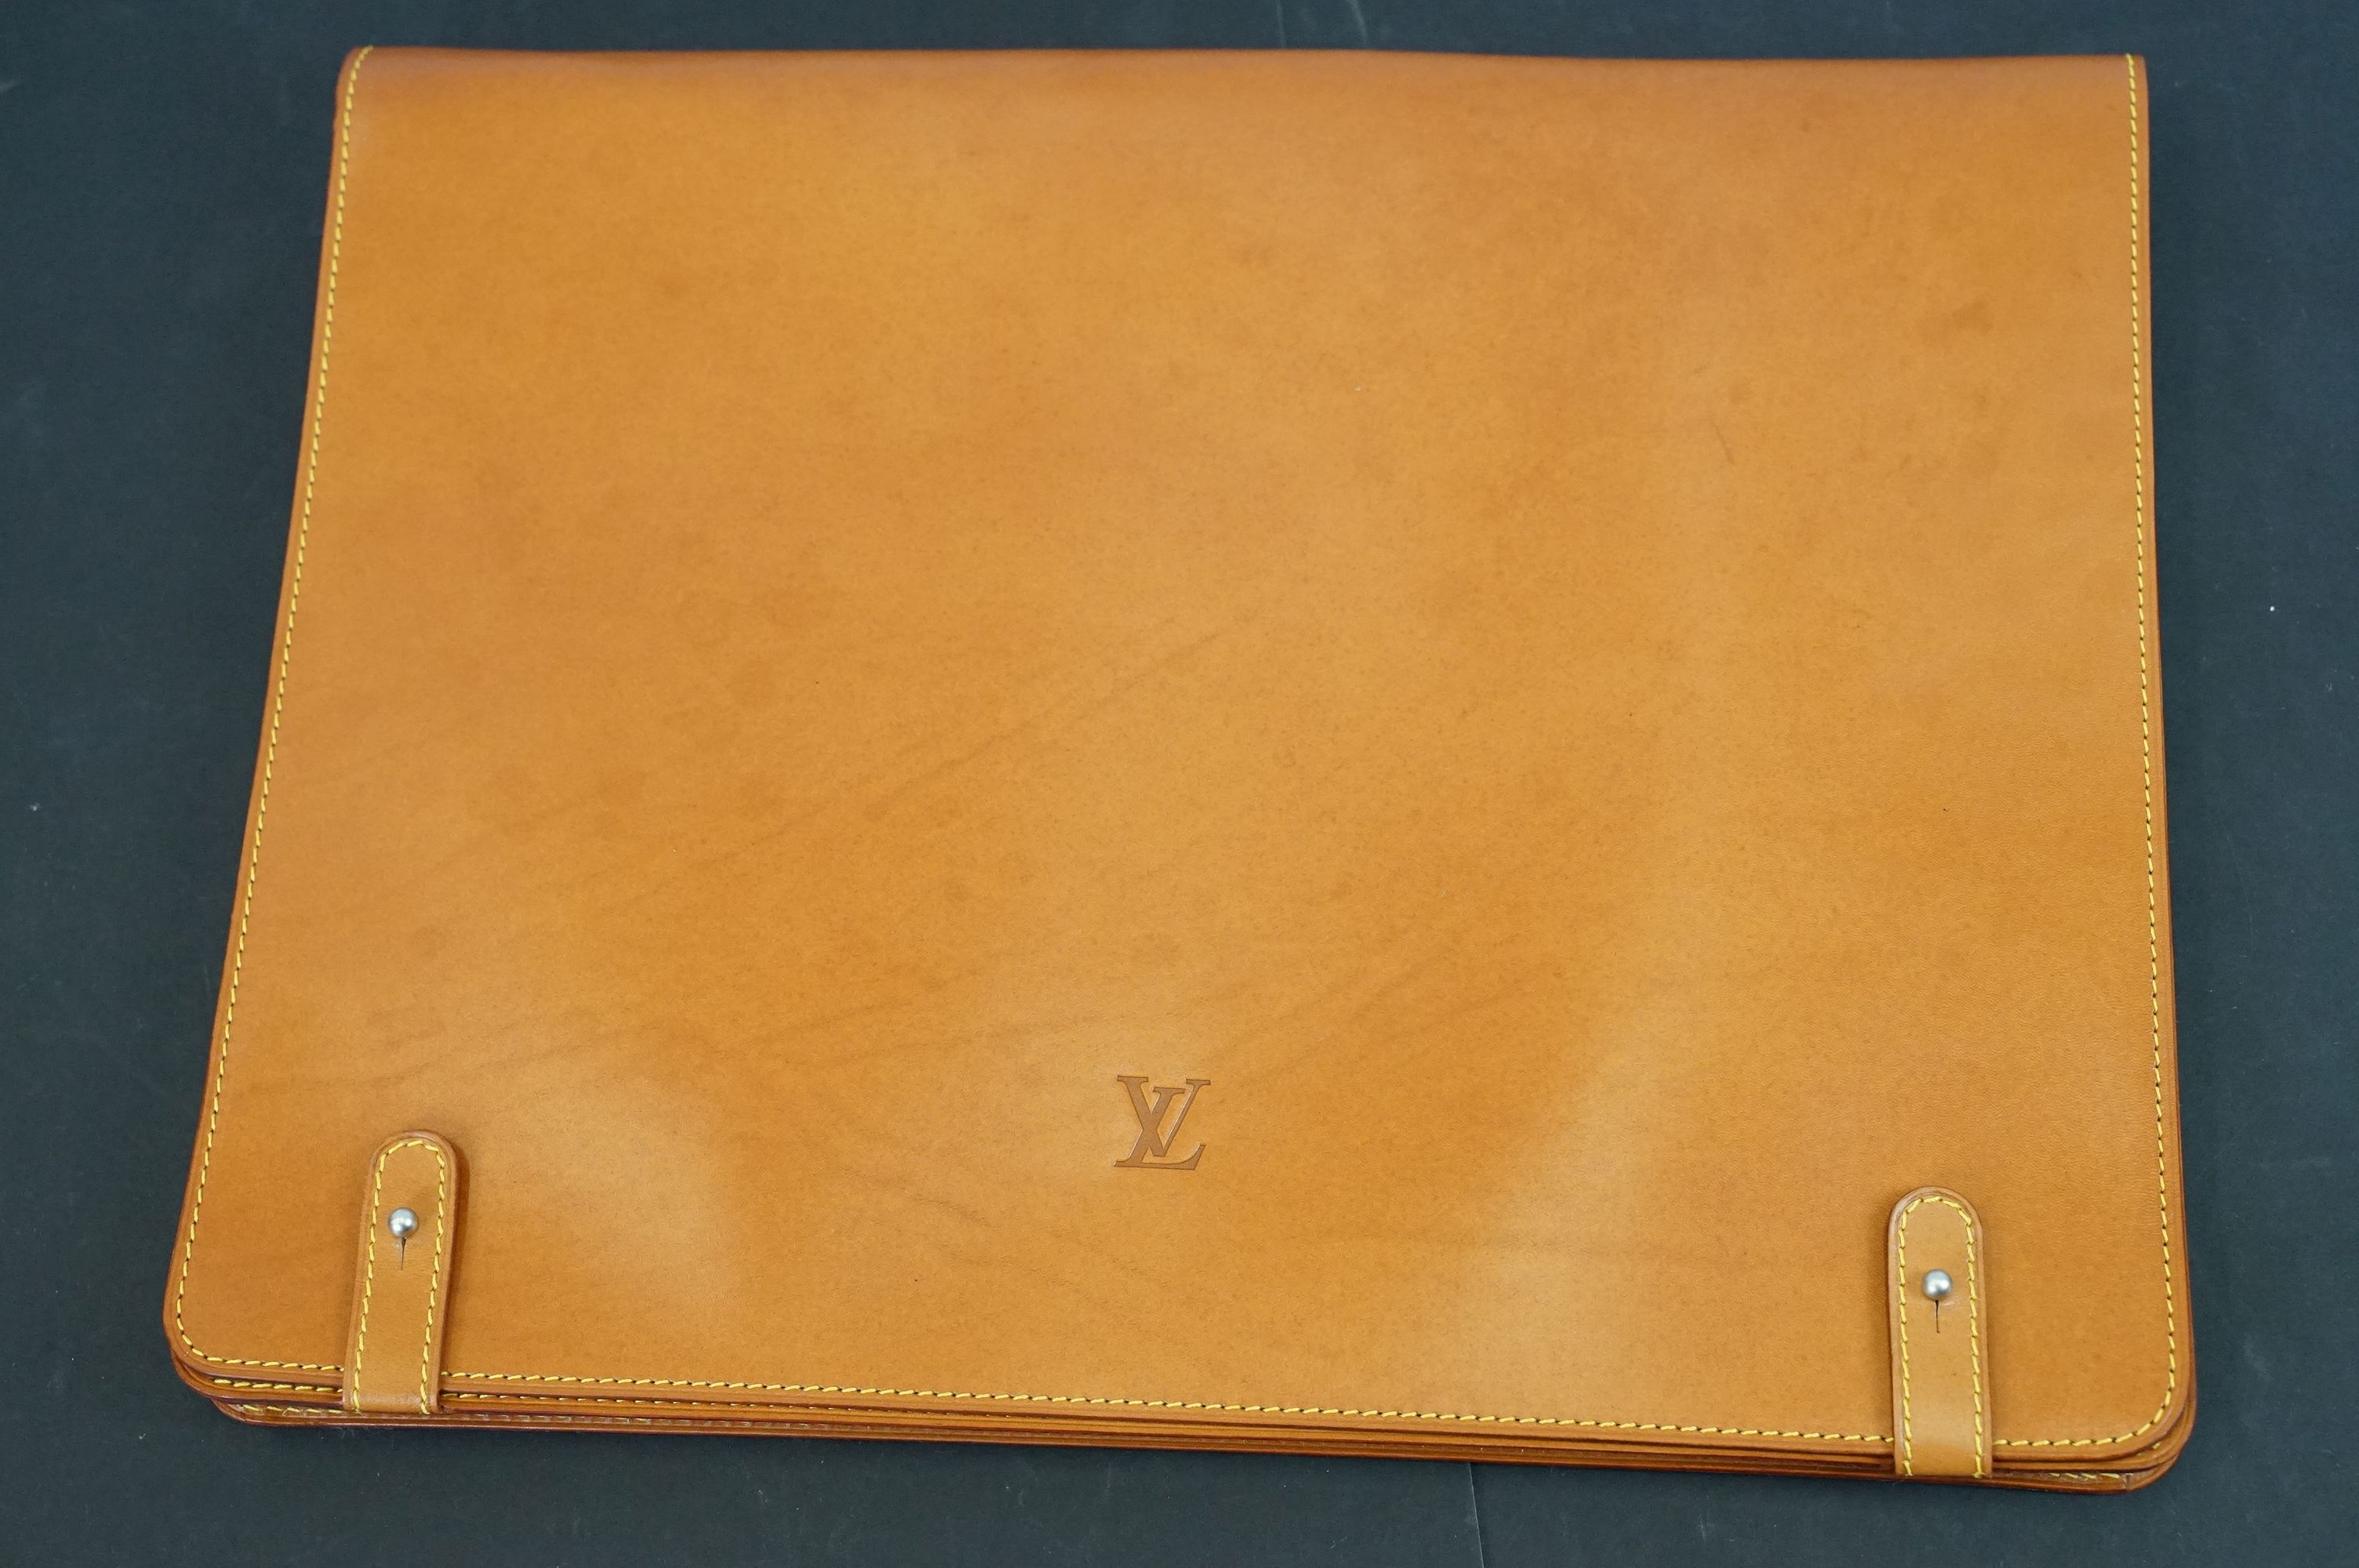 Louis Vuitton - Brown leather document case bag of folded rectangular shape with monogram to front - Image 2 of 12